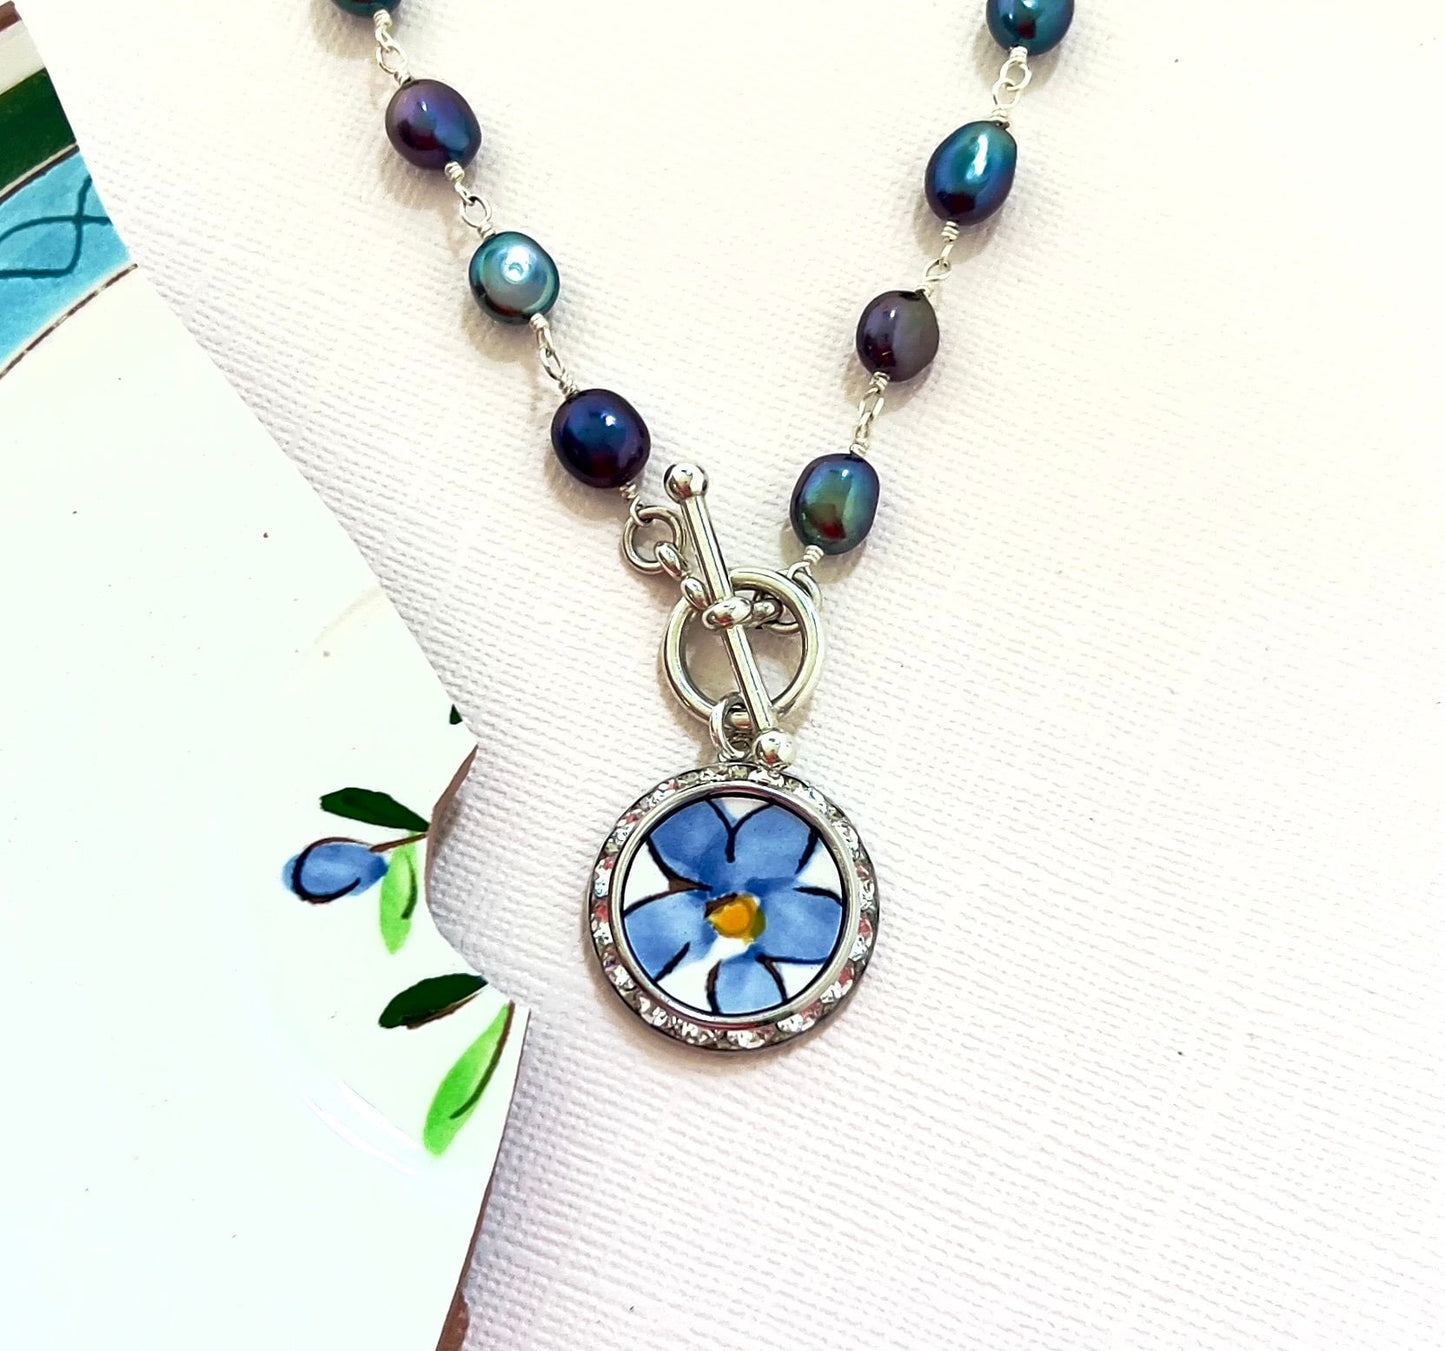 Hand Painted Stangl Pottery and Pearl Necklace, 9th Anniversary Gift for Wife, Broken China Jewelry, Unique 20th Anniversary Gifts for Women